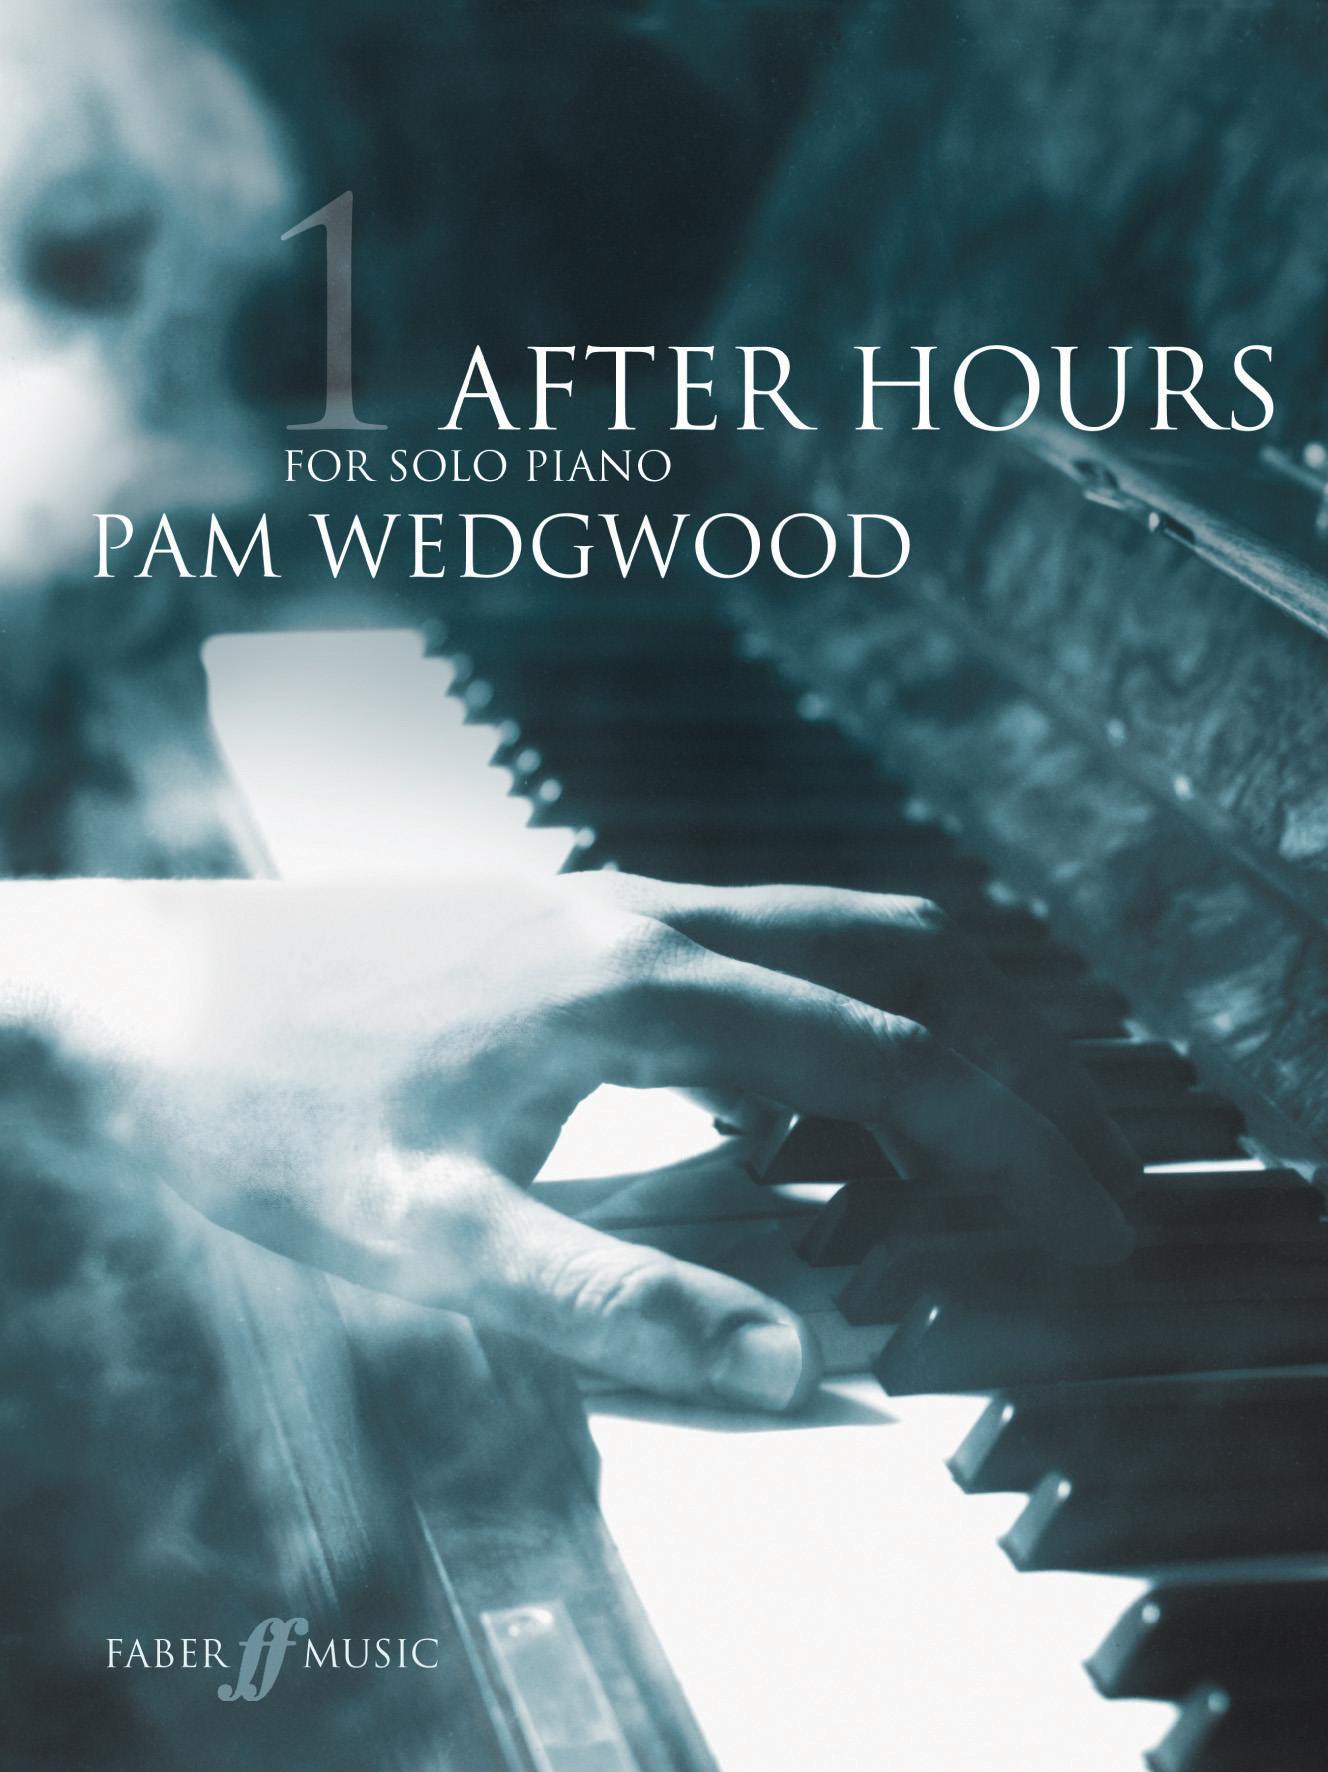 pam-wedgwood-call-it-a-day-piano-solo-digital-sheet-music-download